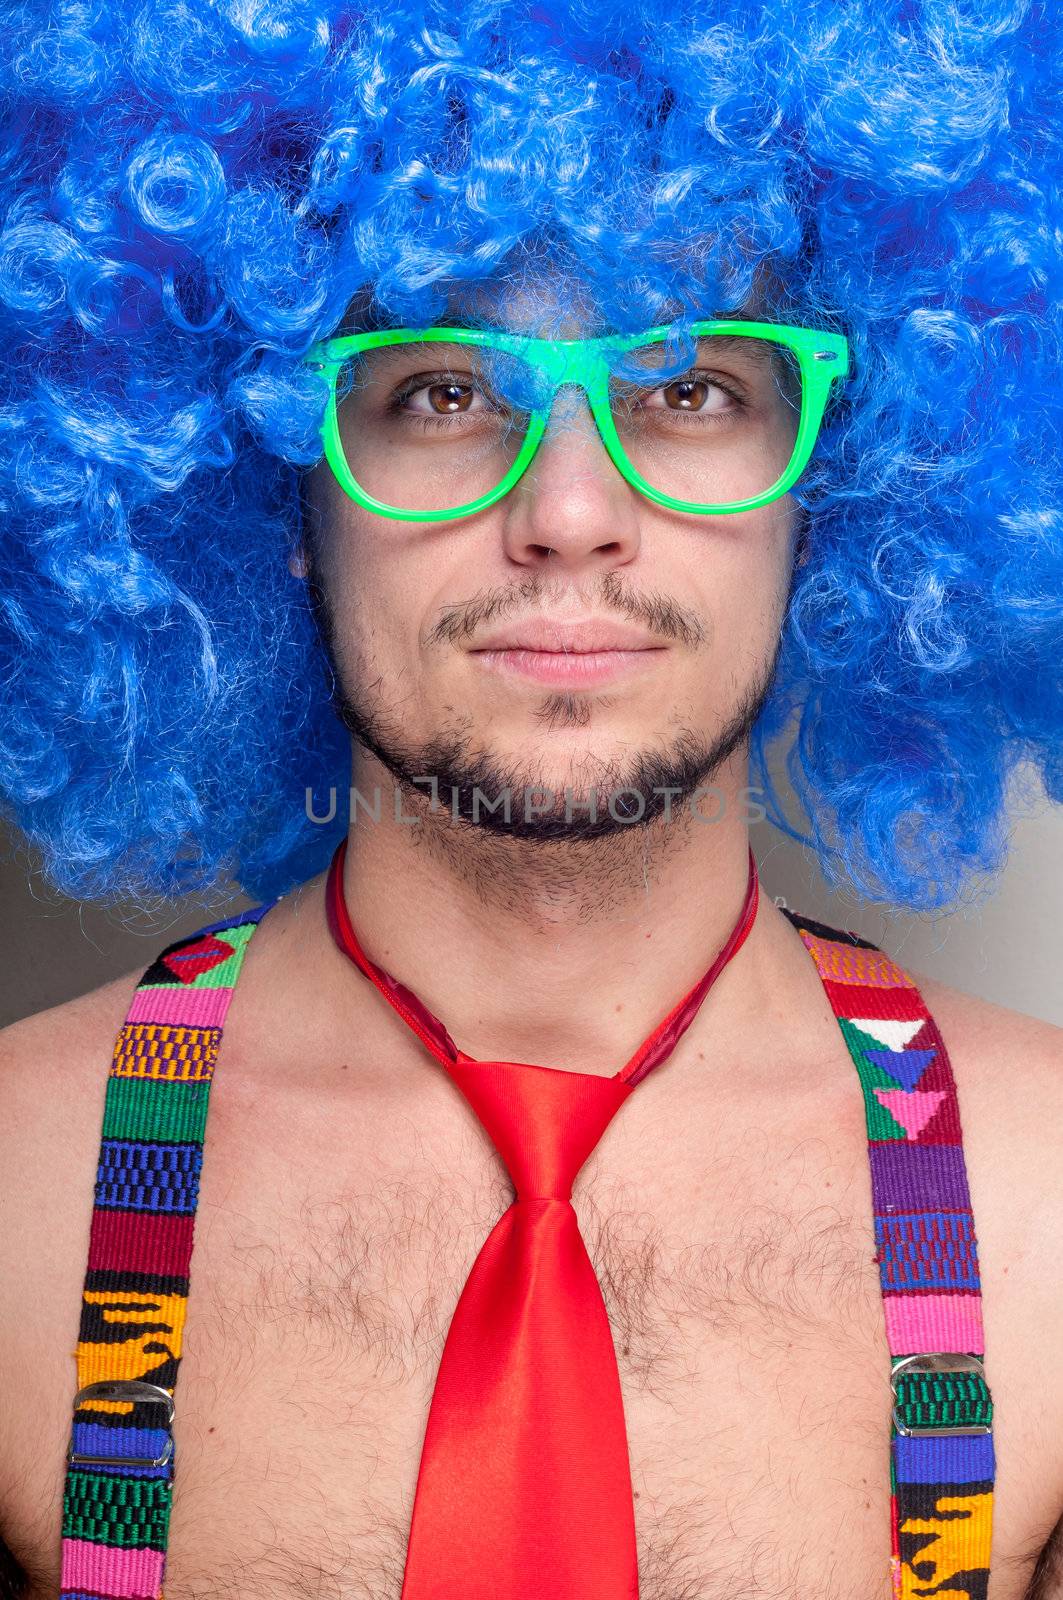 Funny guy naked with blue wig and red tie on green backgrund